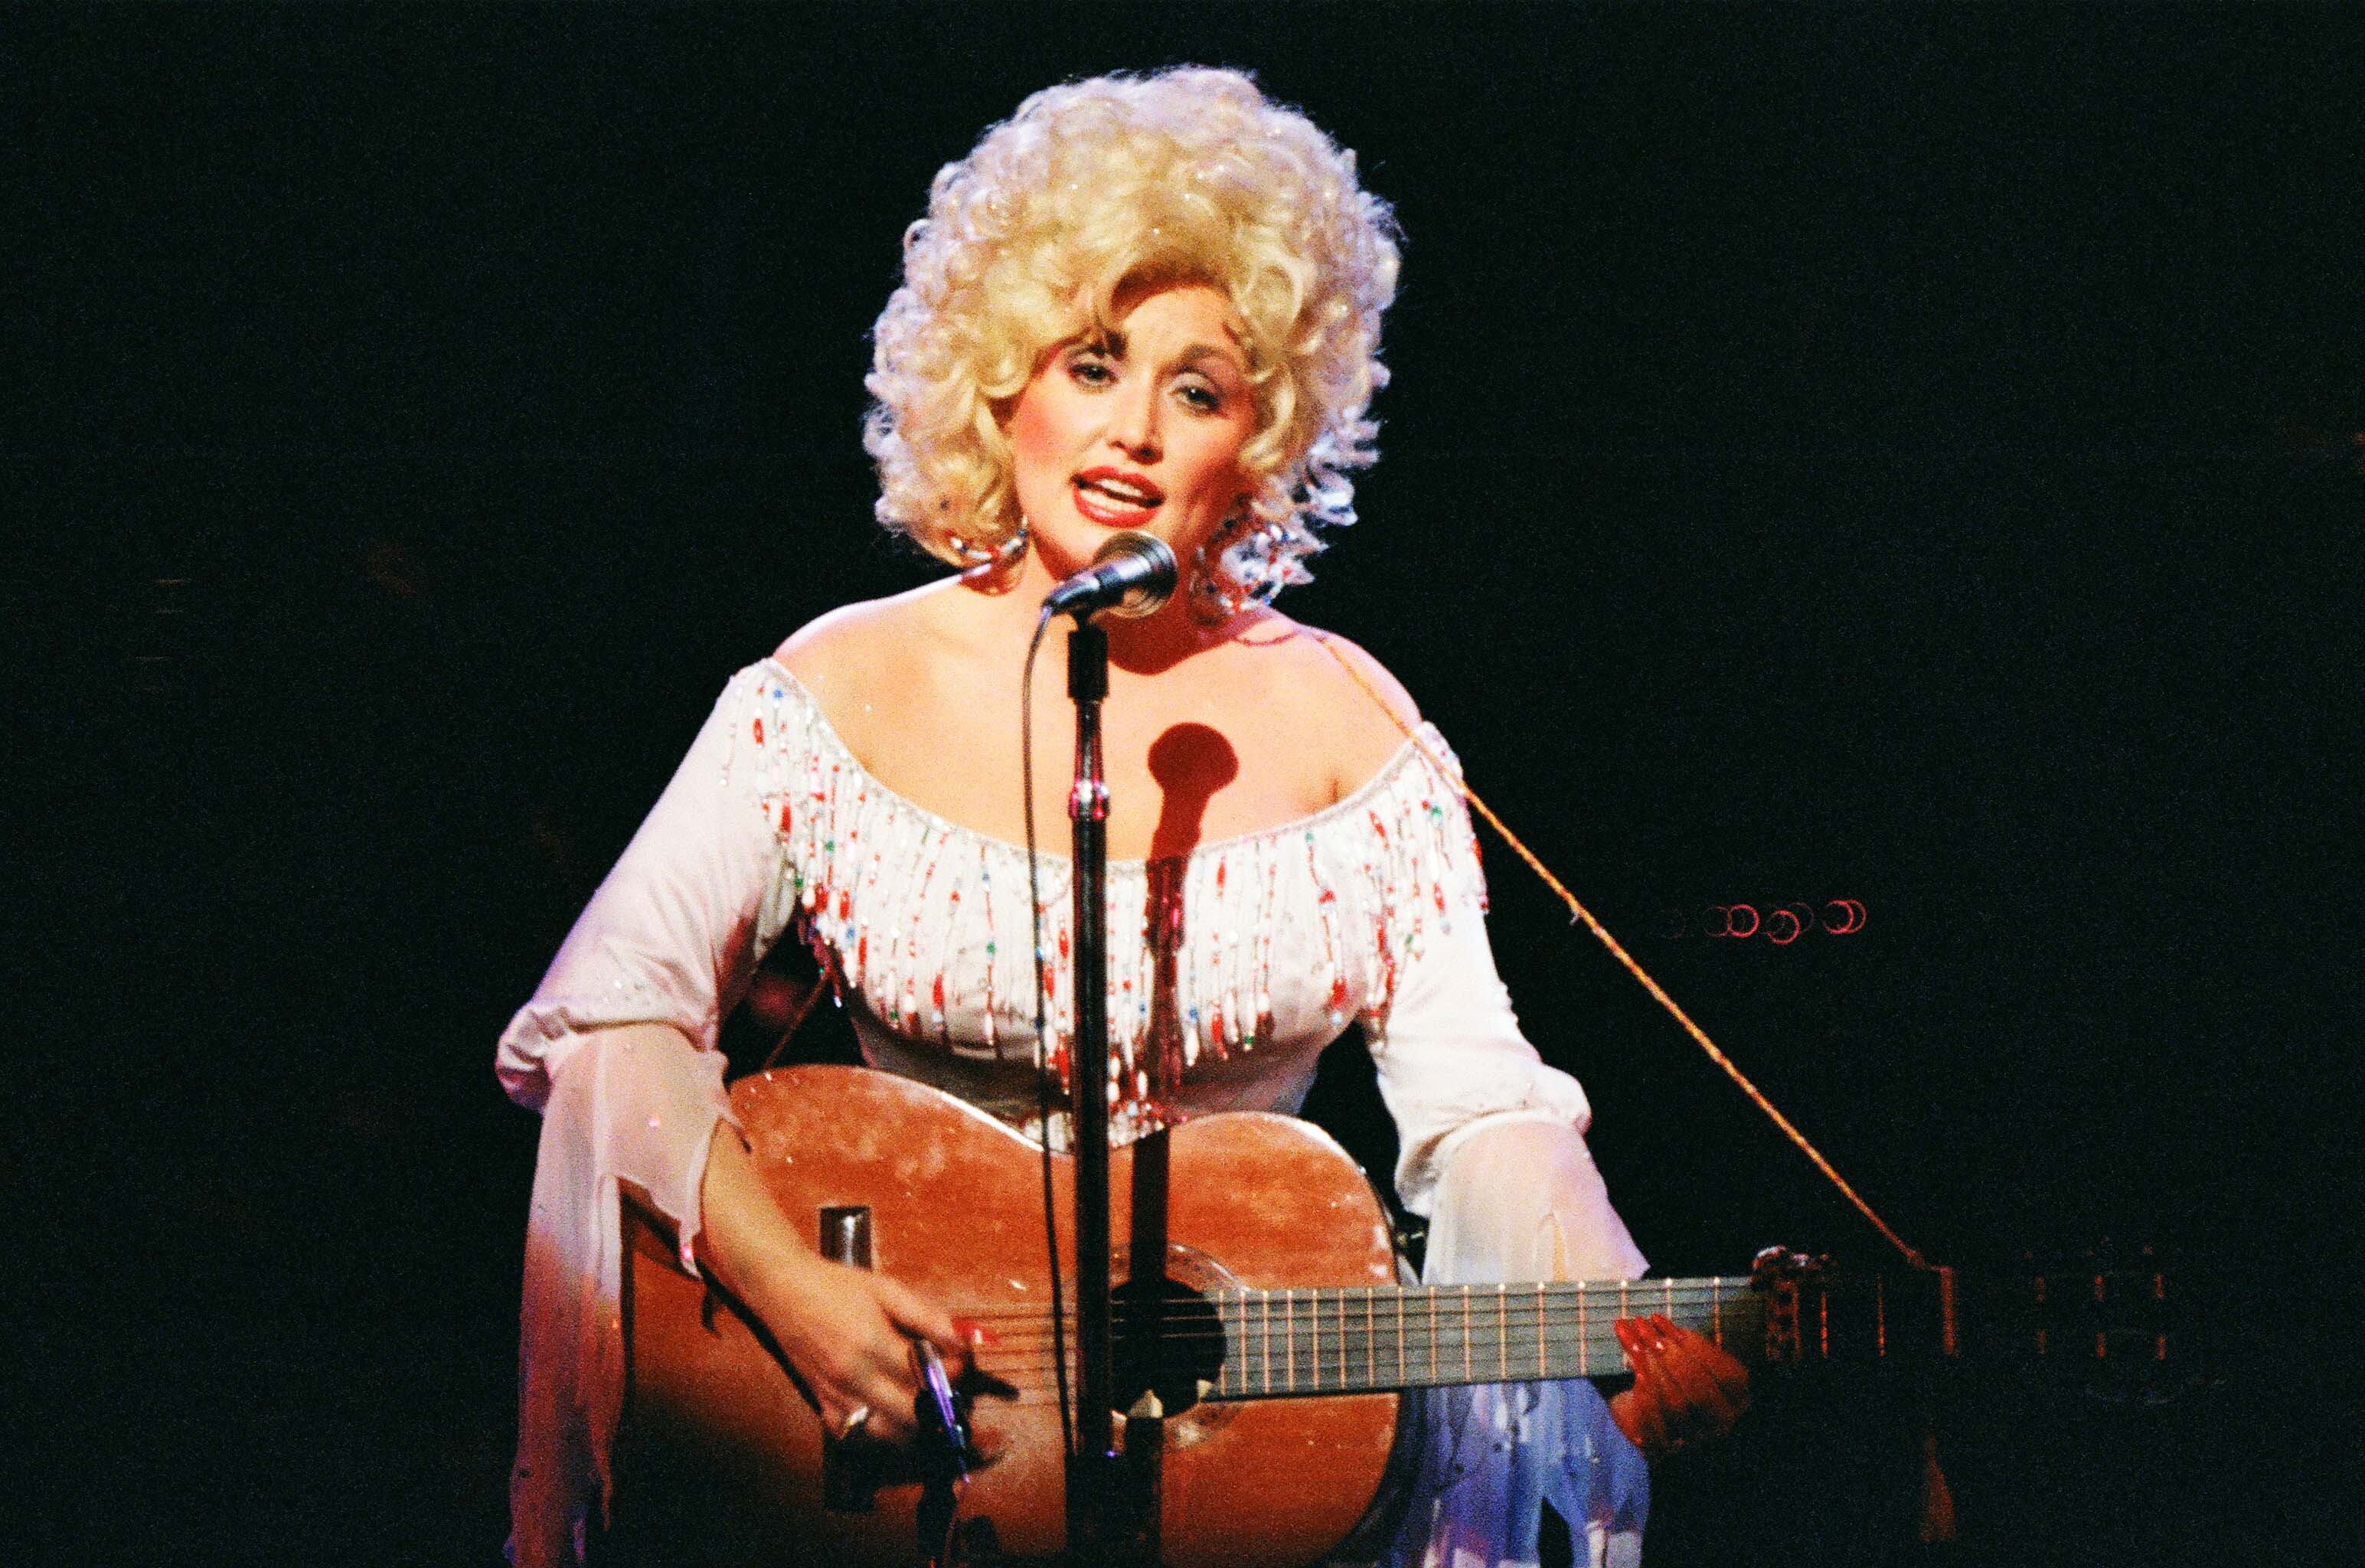 Dolly Parton performs at the Dominion Theatre in London in a sparkly white top and big, blond, curly hair. She's strumming a guitar and singing into a microphone.